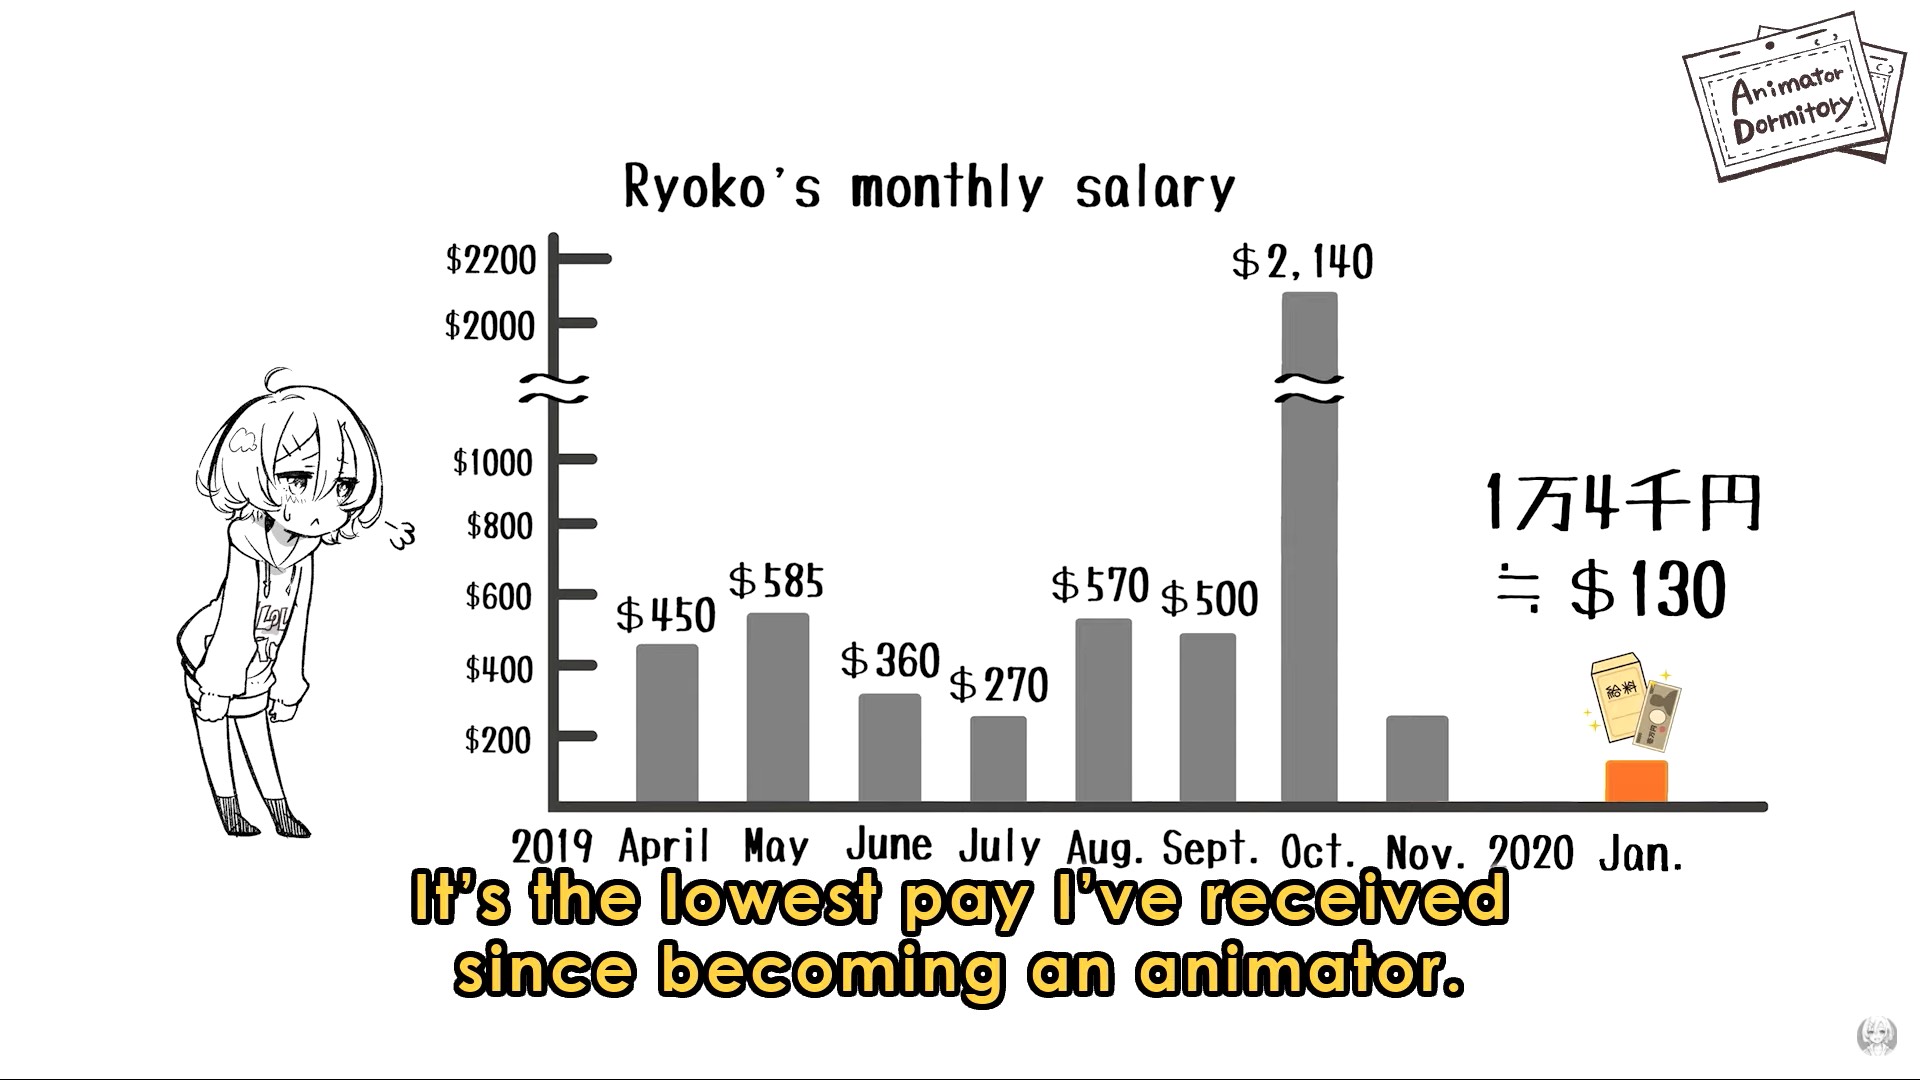 Exploitation In The Anime Industry: An Entry-Level Animator In Japan  Explains Why She Earned $175/Week